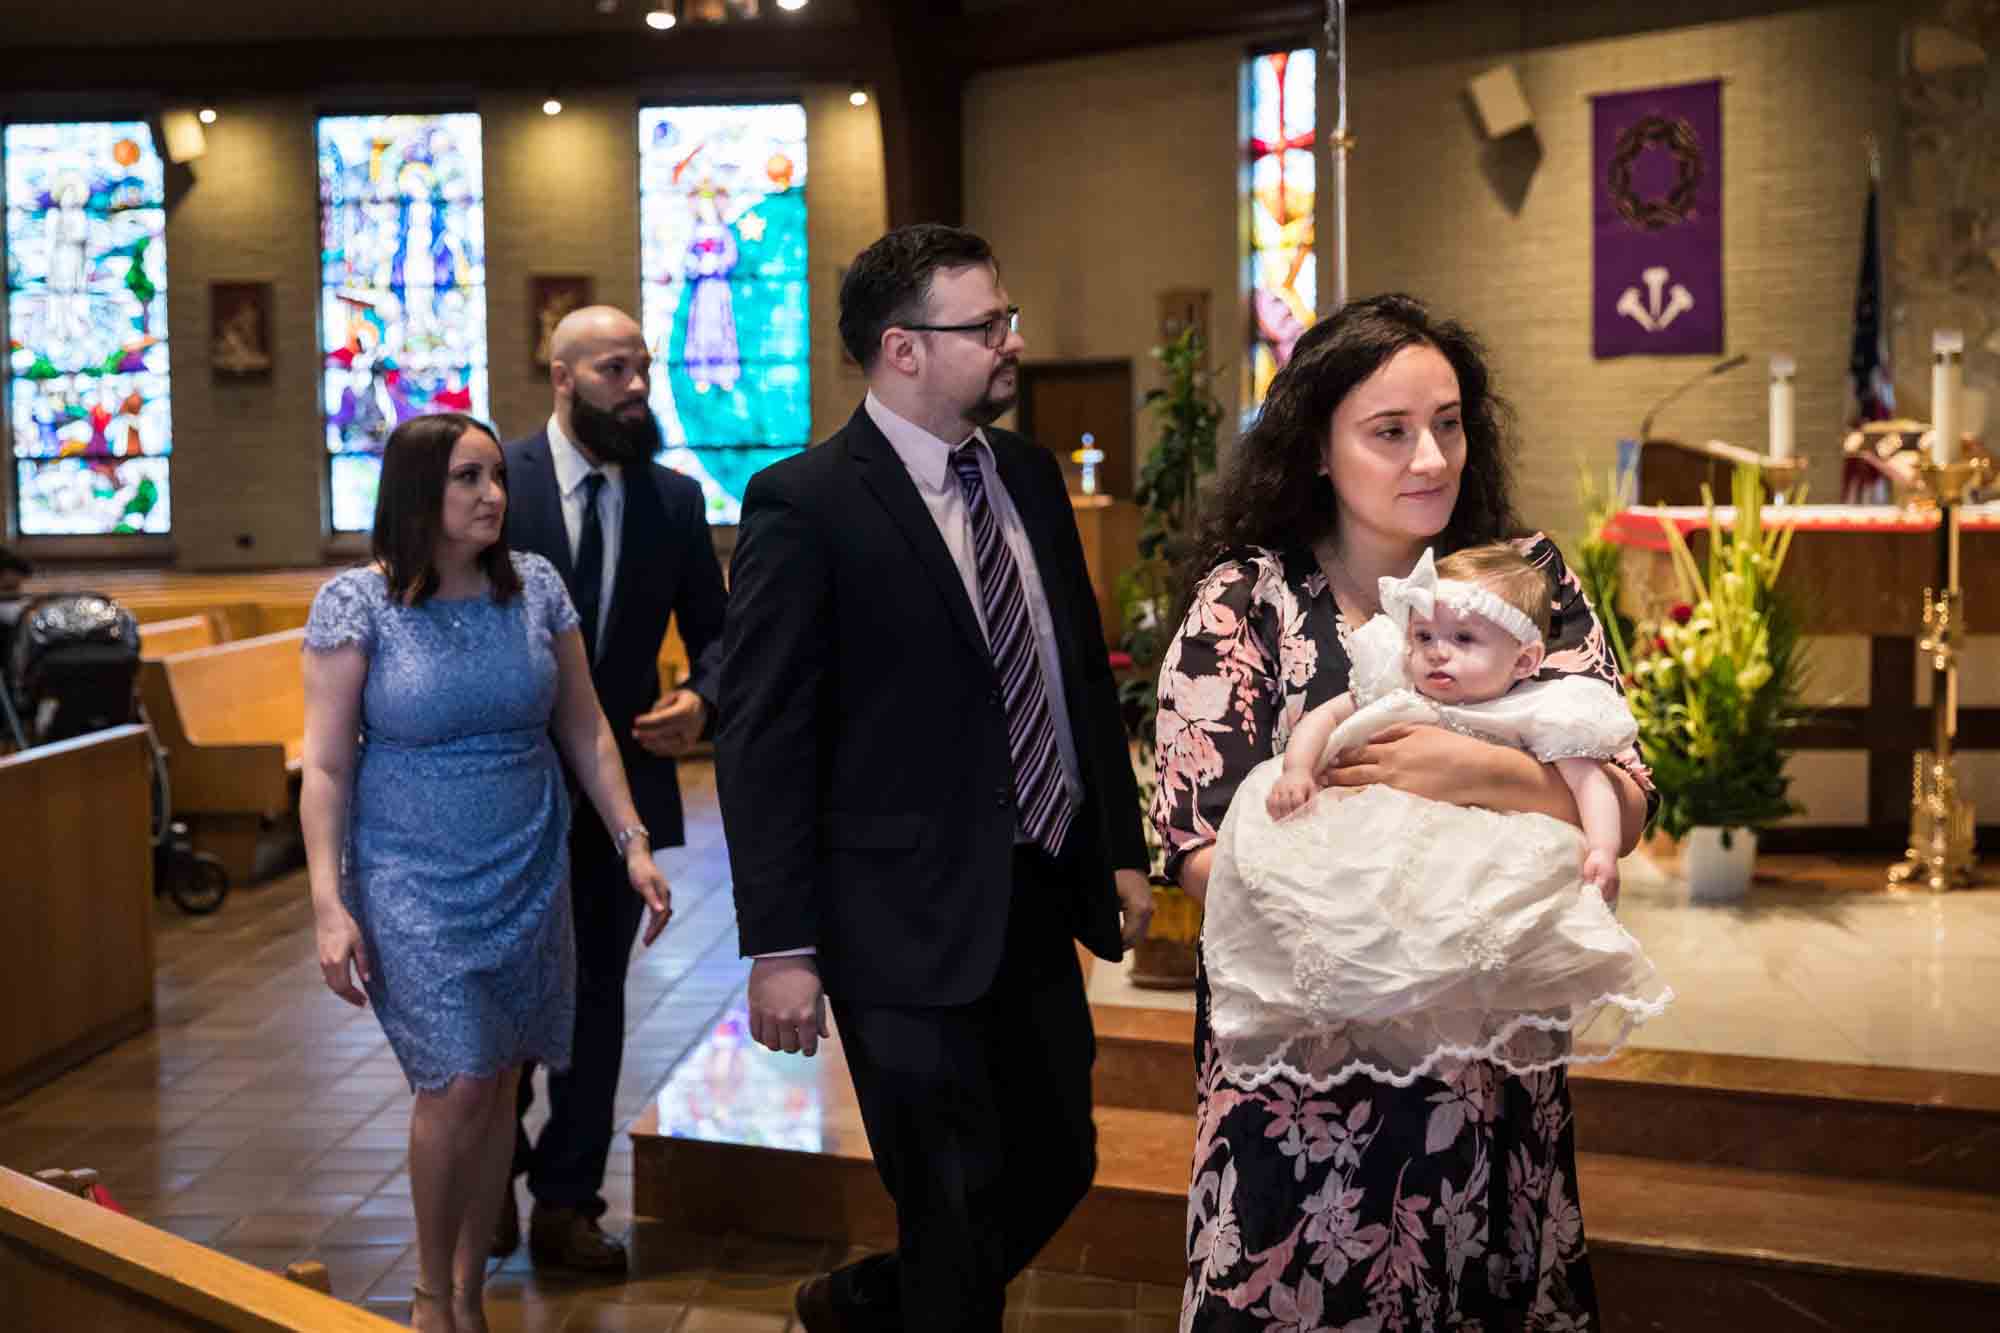 Maspeth baptism photos of mother and family bringing baby to baptismal fount